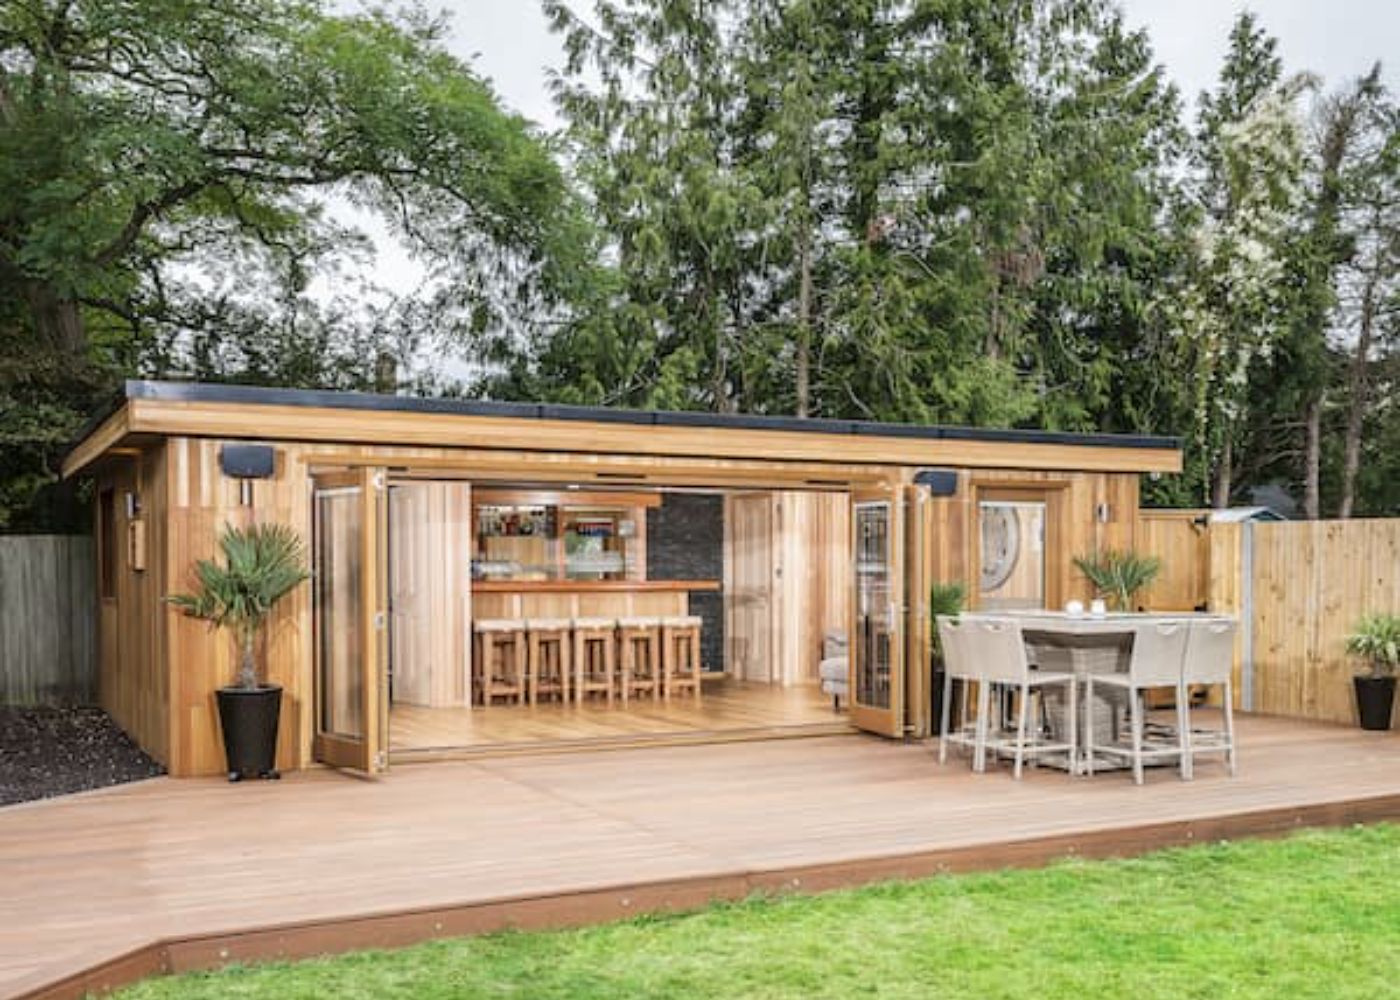 9m-x-5m-with-Cedar-cladding-and-EPDM-roof (1)